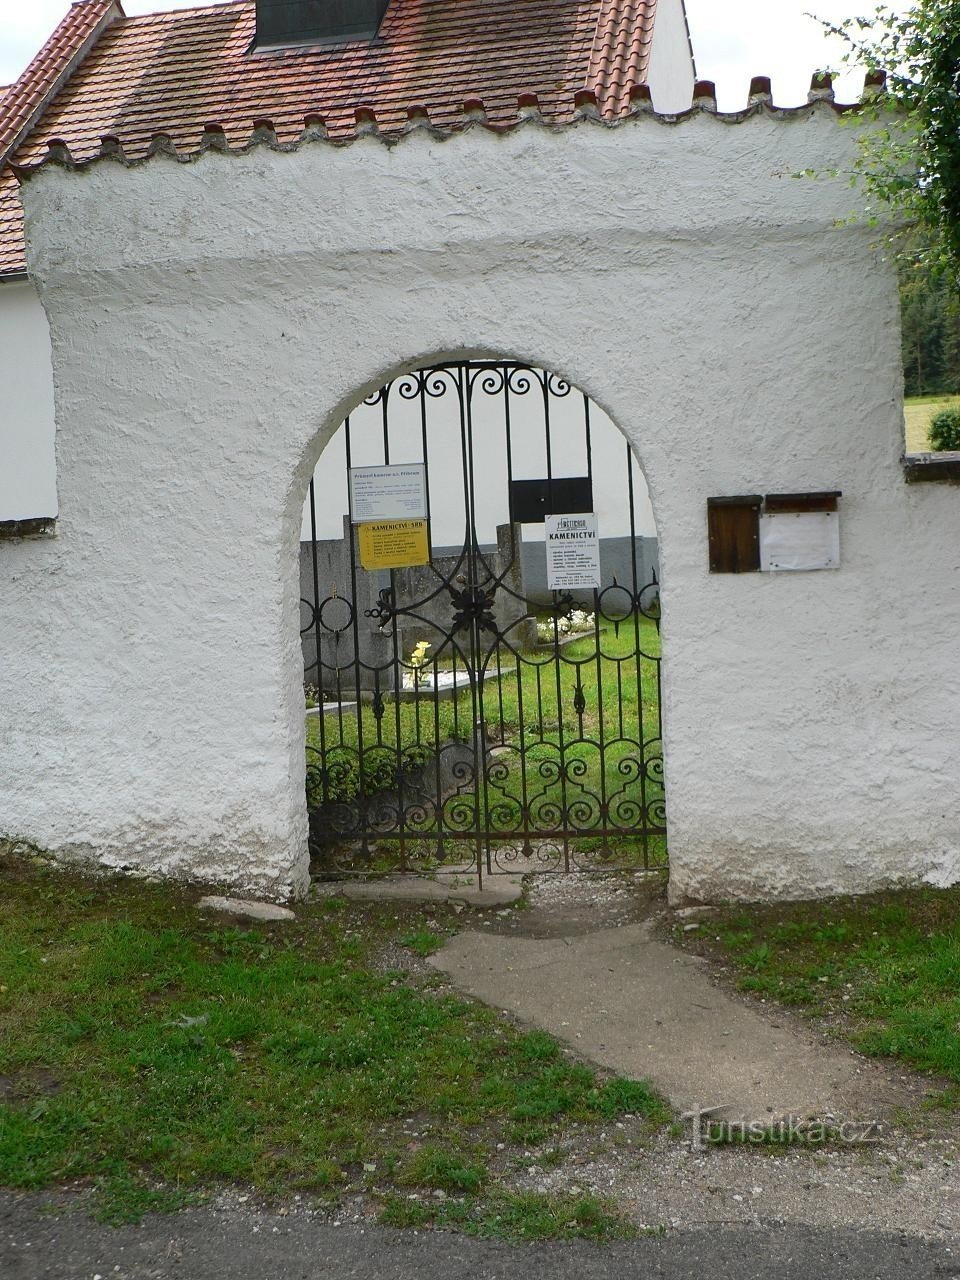 Entrance to the cemetery